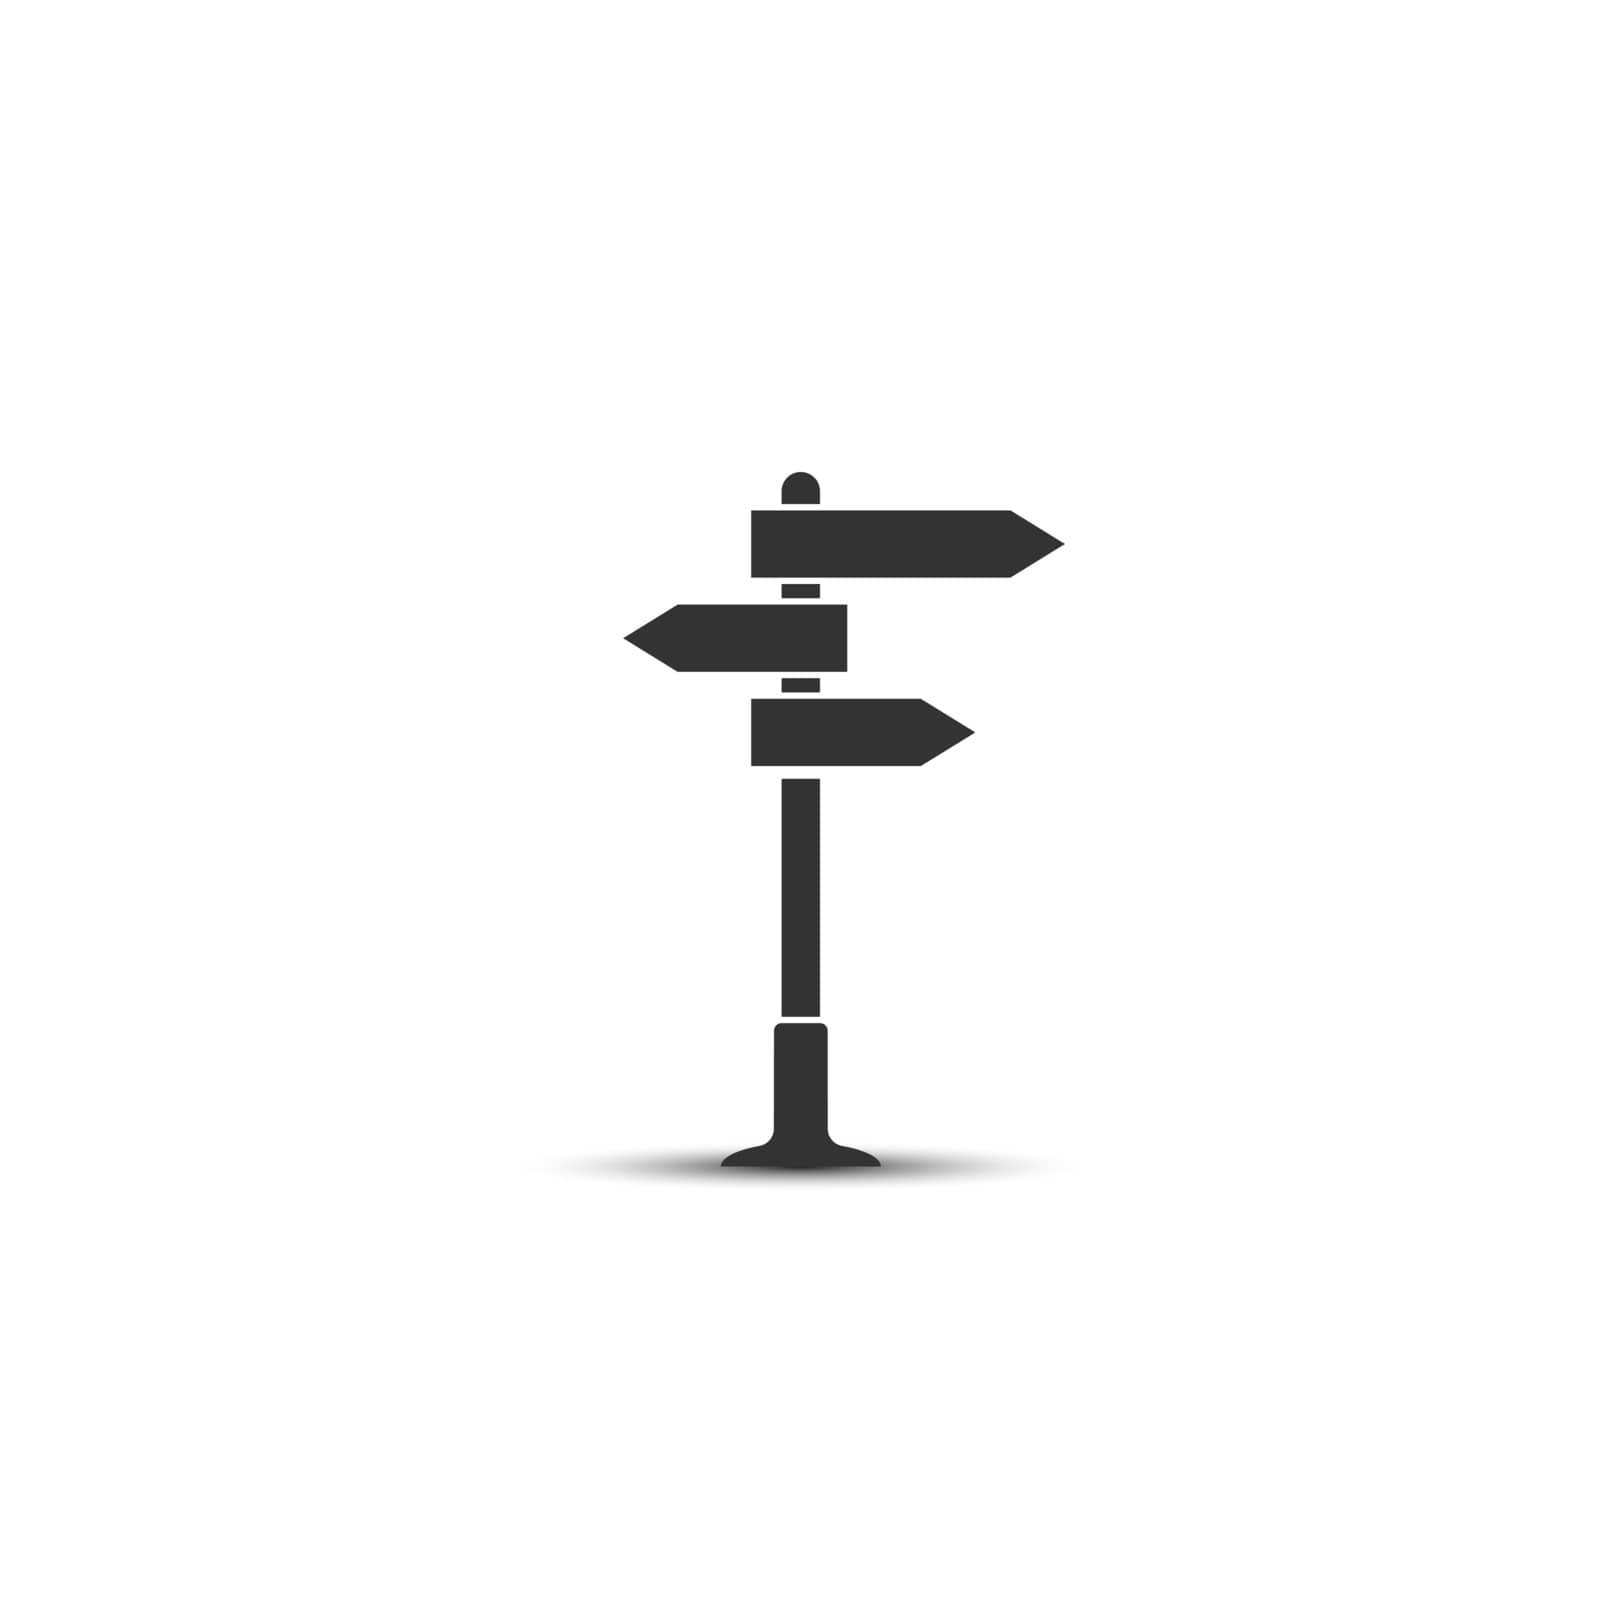 Direction indicator icon with two placemarks. Vector illustration. Stock image isolated on a white background.